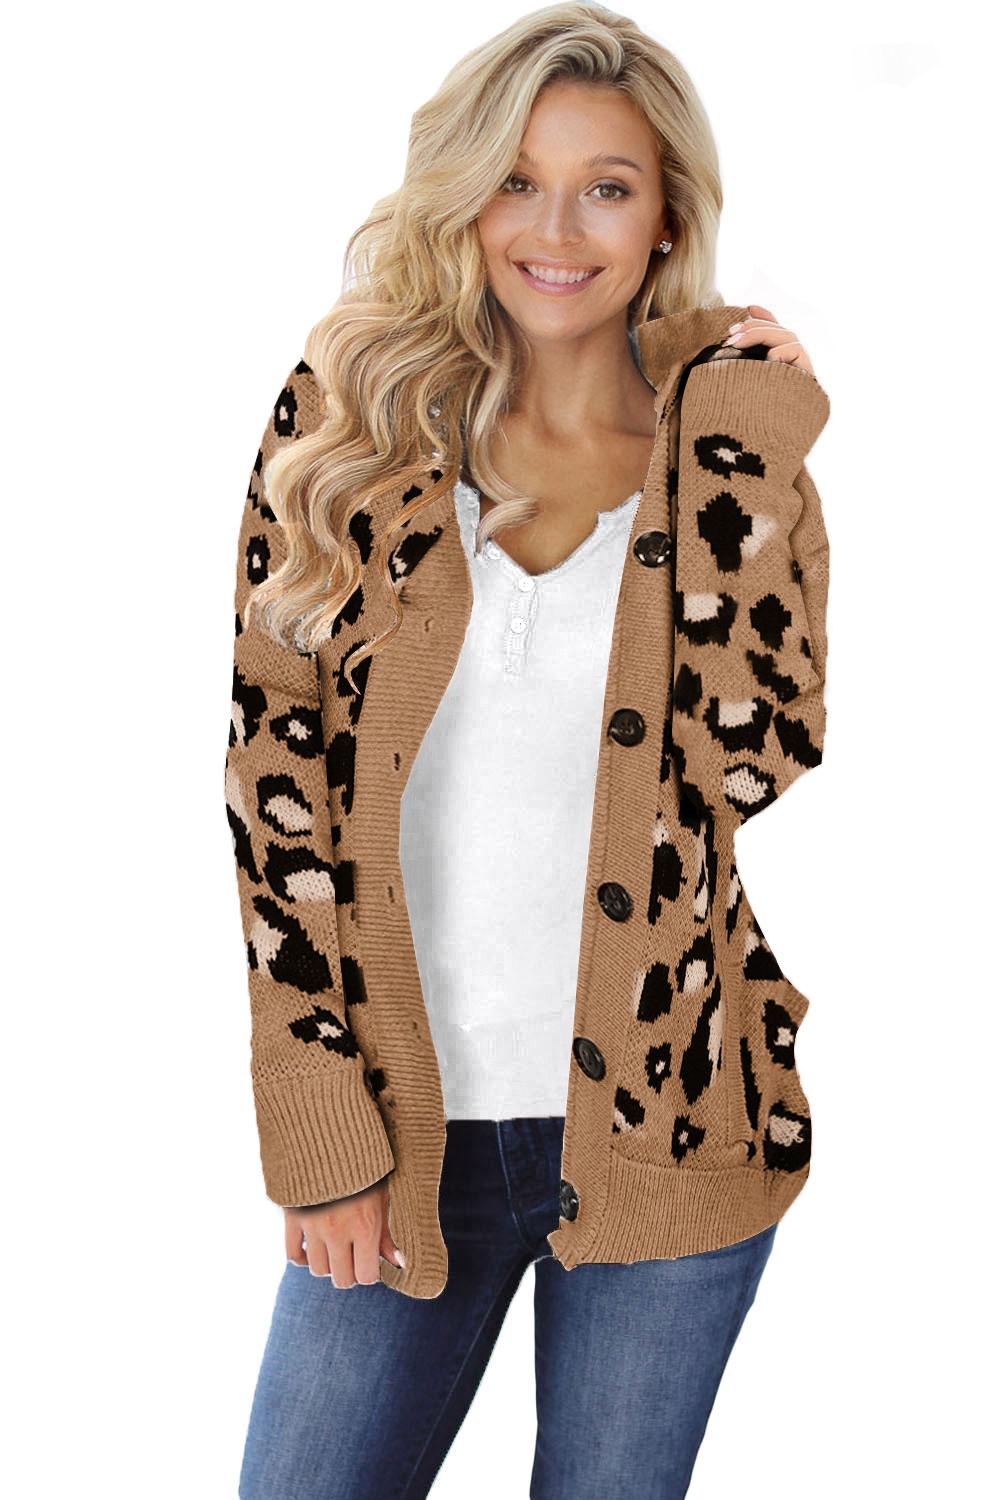 Long Sleeve Button-Up Hooded Leopard Print Cardigan